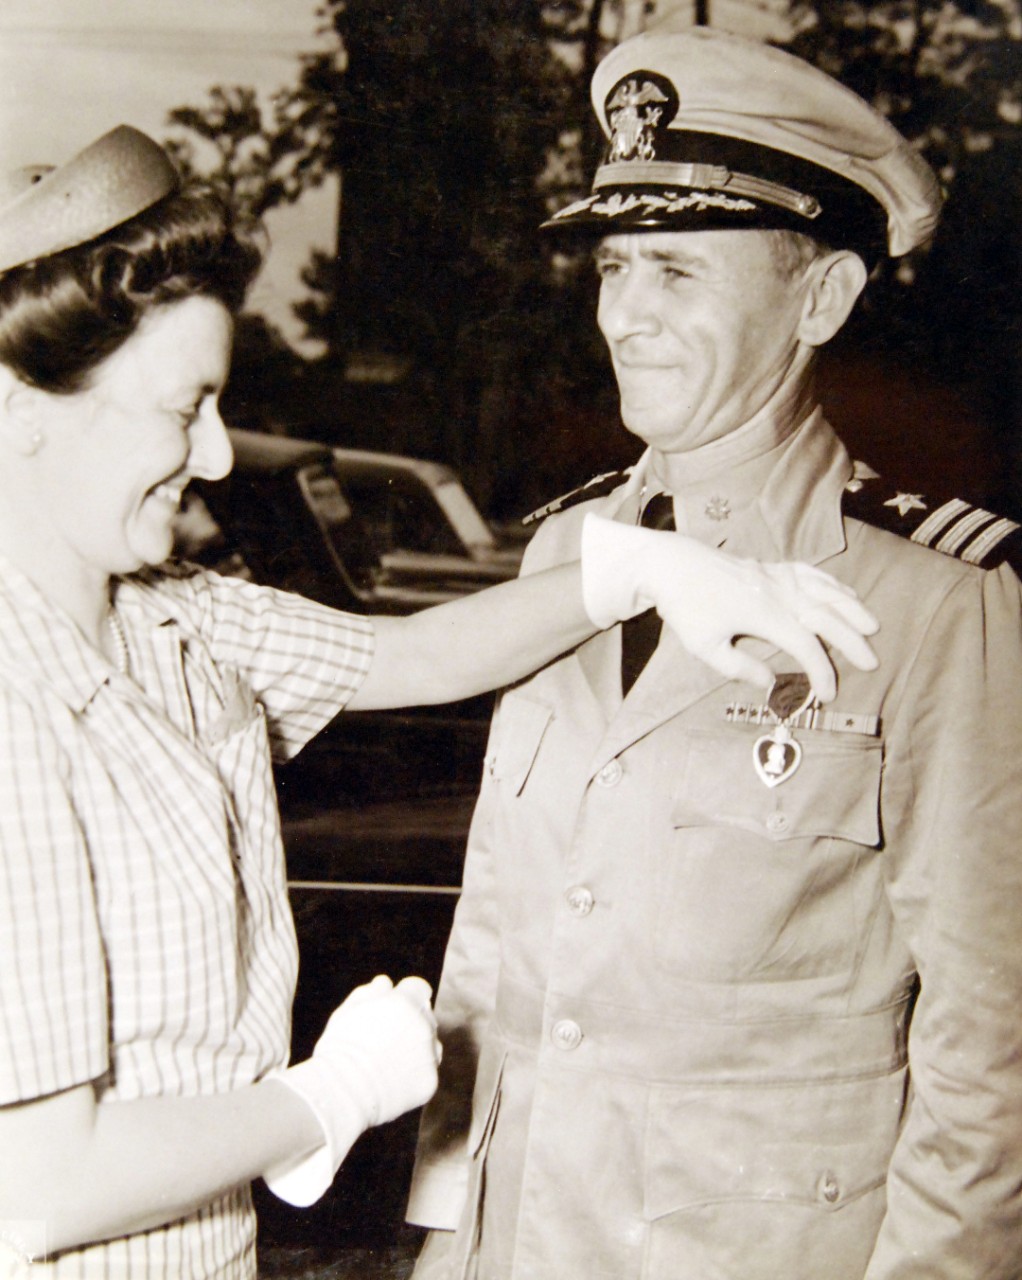 80-G-42770:  Commander E. J. Davis, USN, Purple Heart.      Commander Davis, fomer gunnery officer of USS Yorktown (CV-5), at Naval Operating Base, Norfolk, Virginia,  receives the Purple Heart Medal for the injuries received in the Battle of Midway.  Shown:   Mrs. E. J. Davis pins medal on husband, as Commander R.G. Pennoyer, Commanding Officer of Fleet Service Schools looks on.   Photograph released July 10, 1943.  Official U.S. Navy Photograph, now in the collections of the National Archives.   (2017/08/01).  